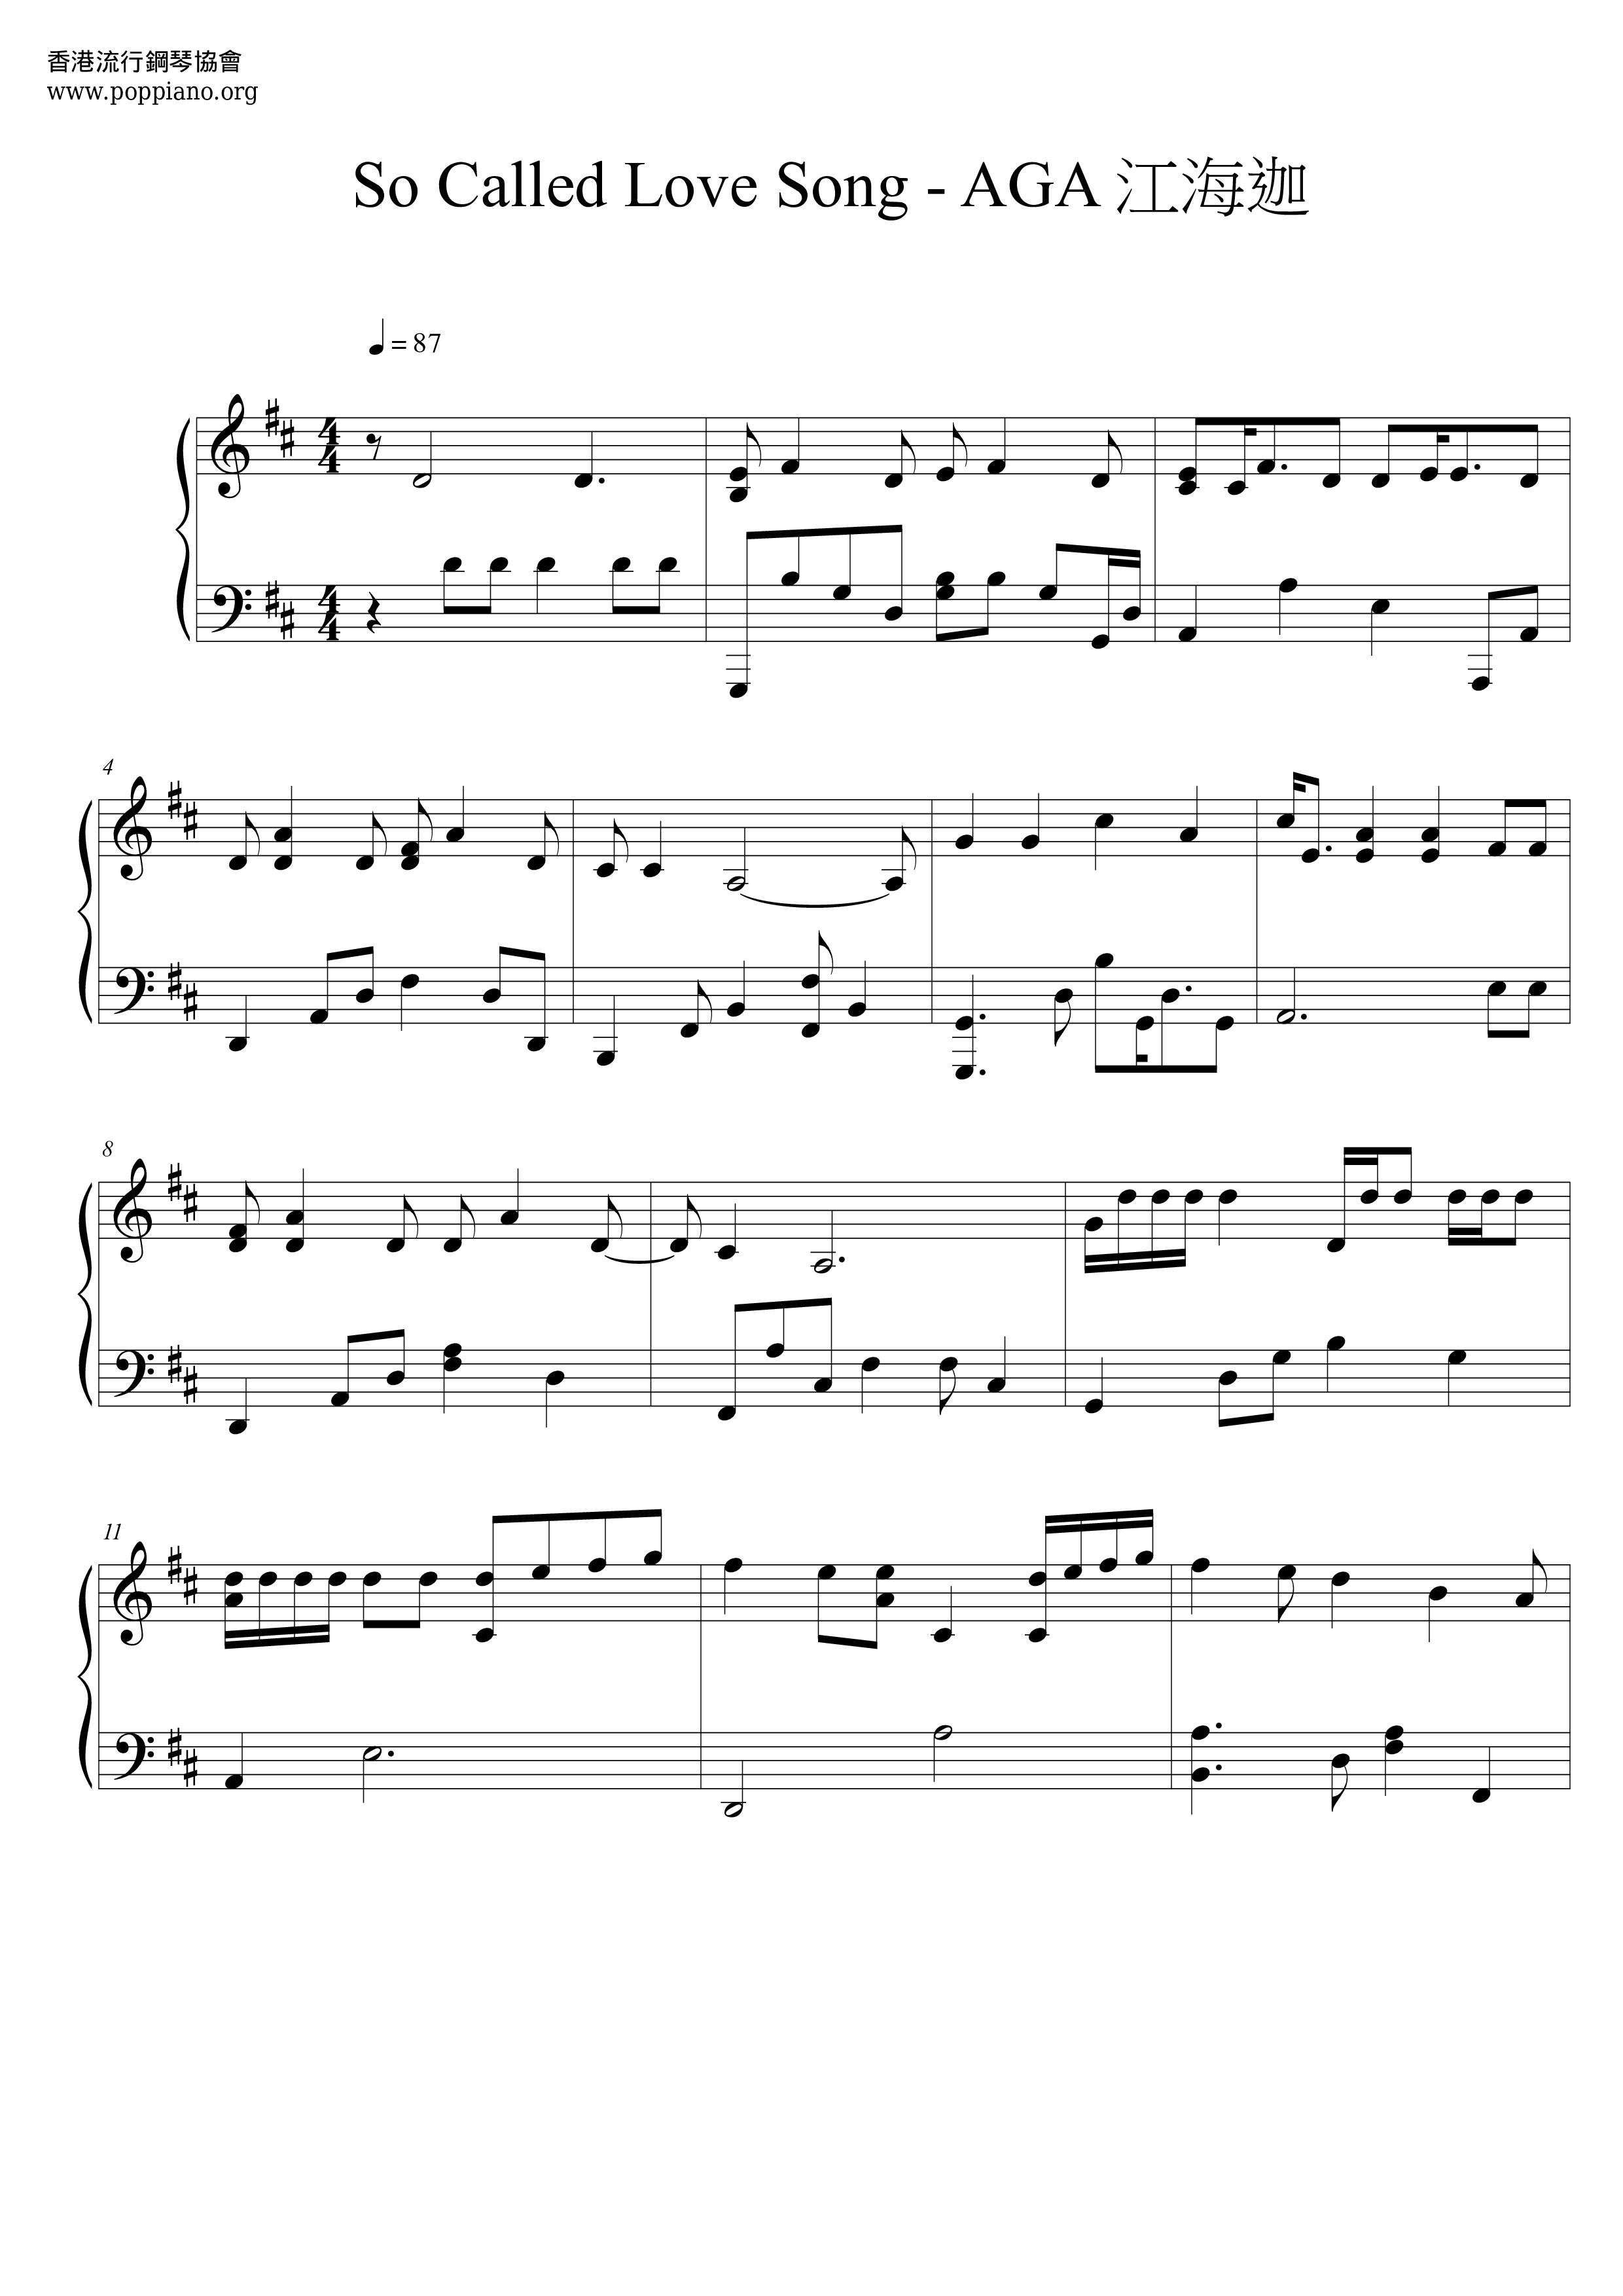 So Called Love Song Score